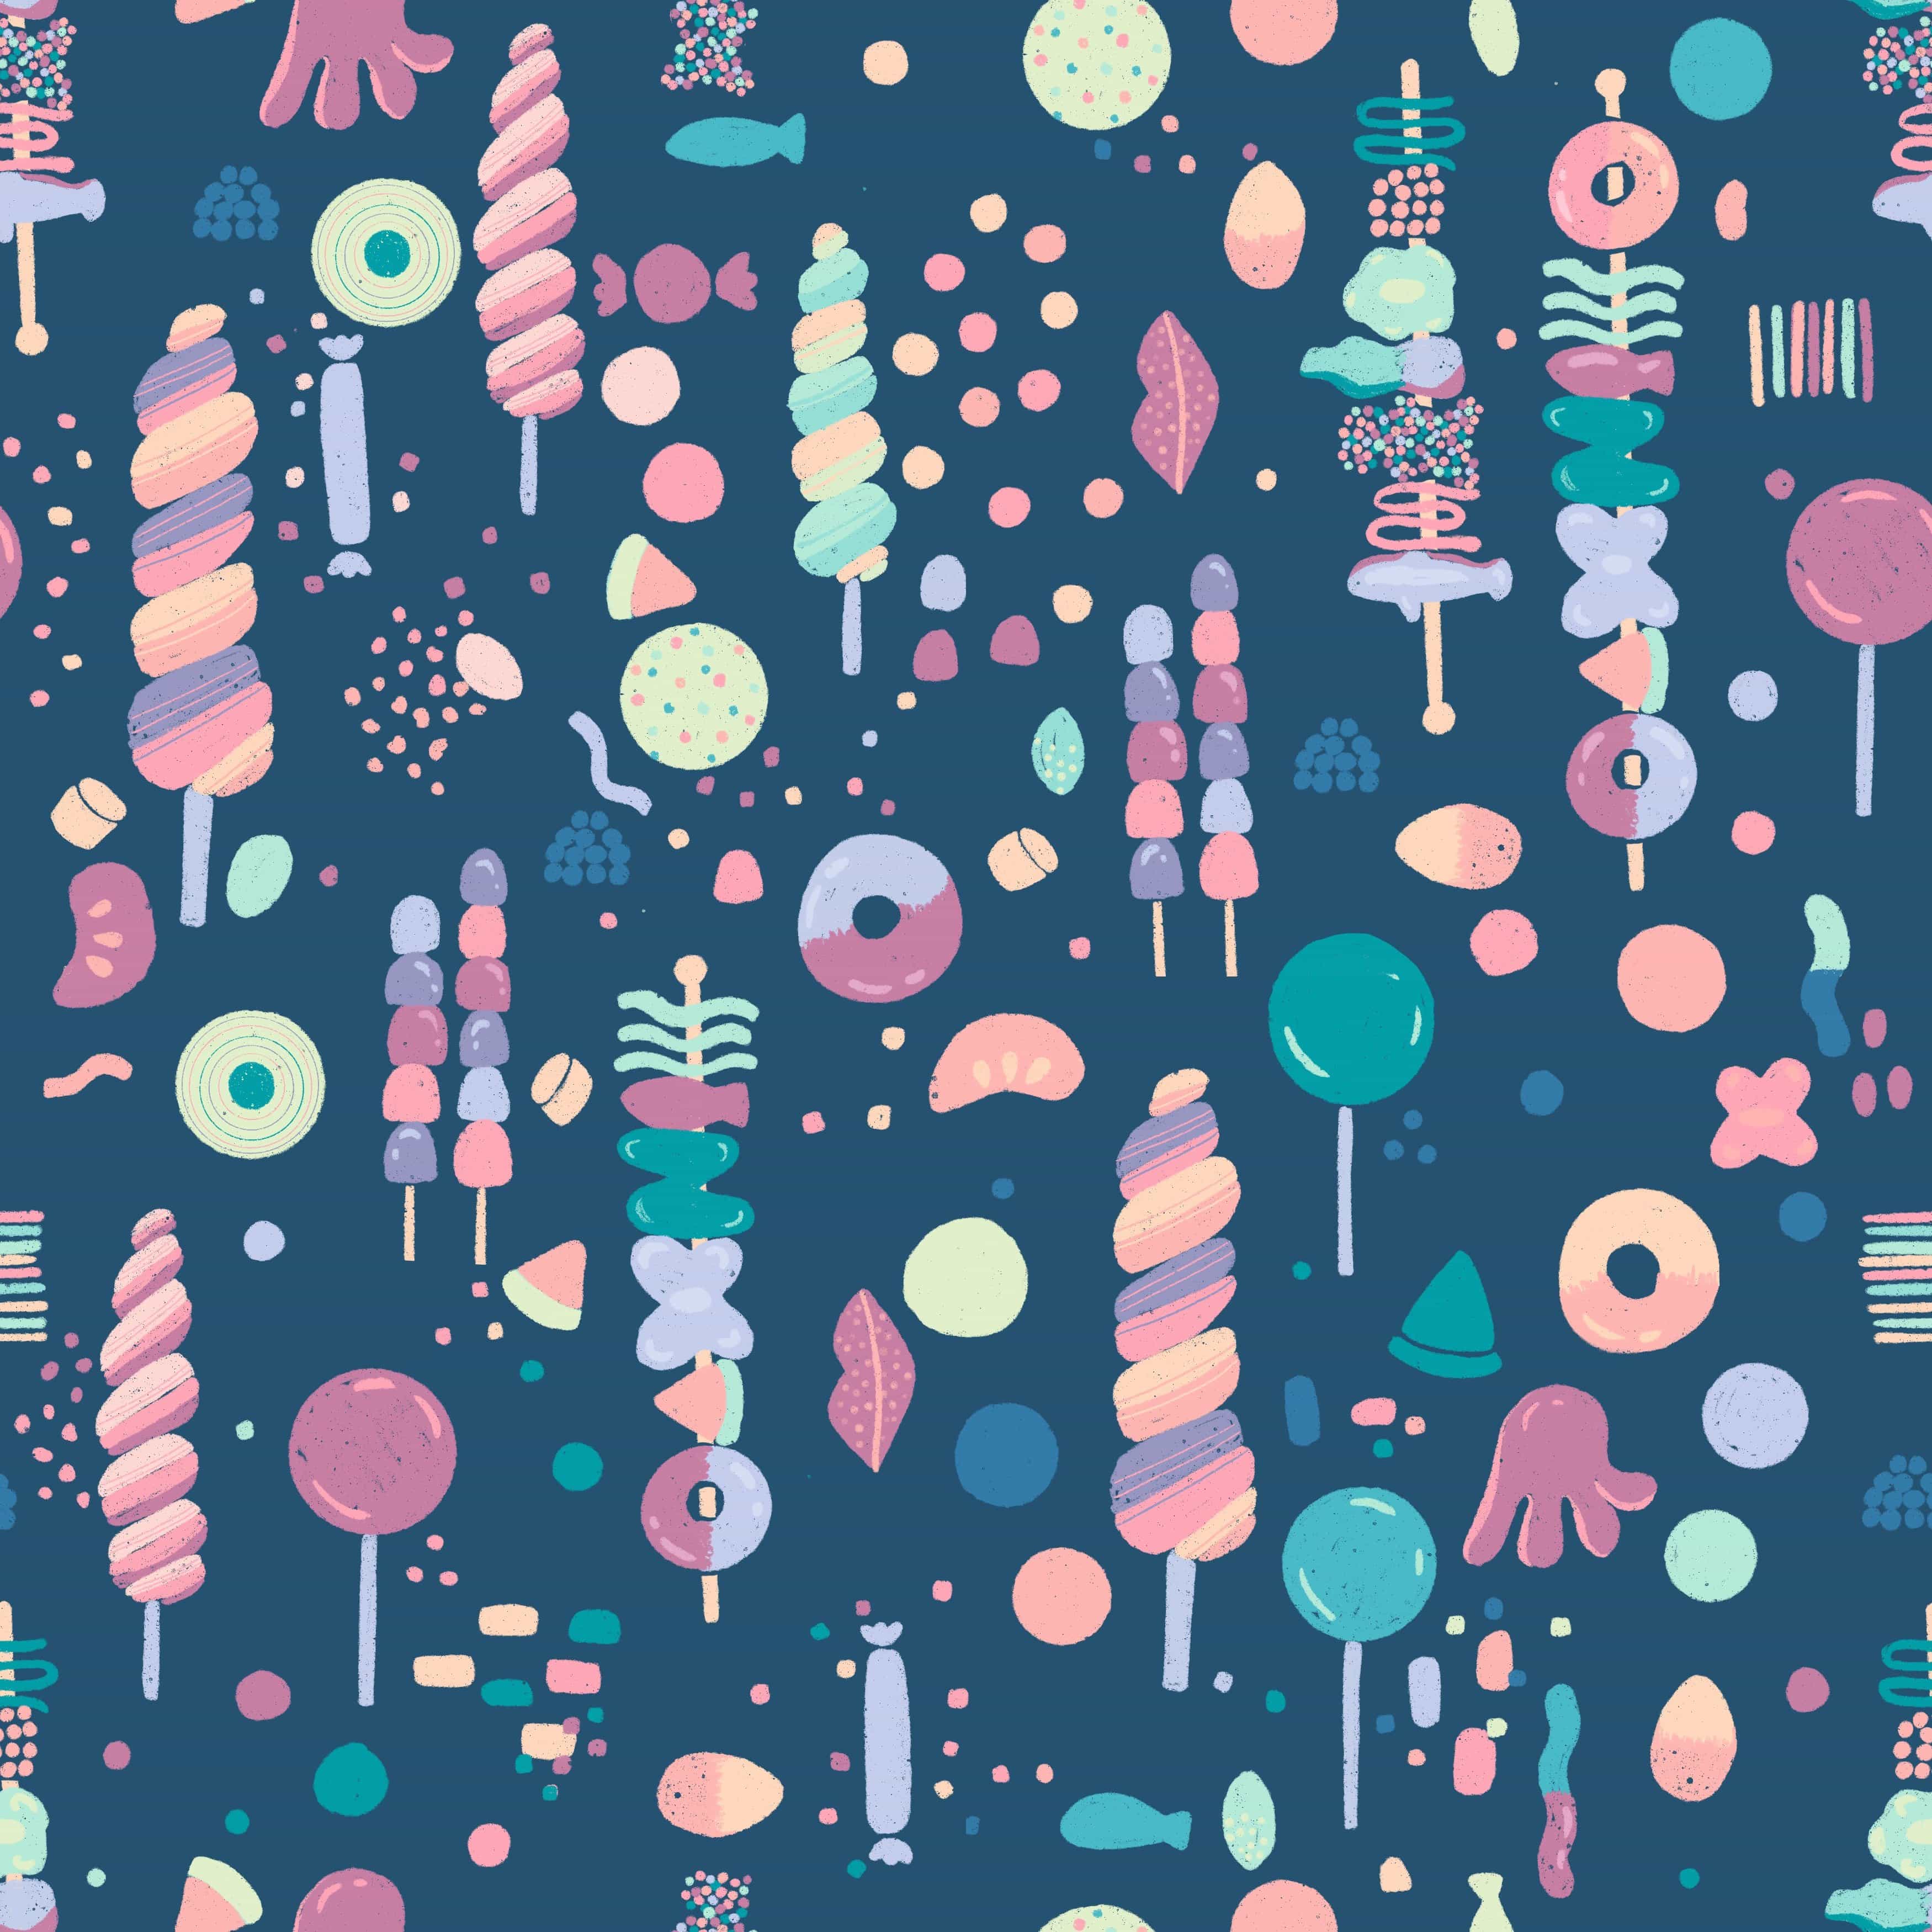 Candy Fan Club: Bright Removable Wallpaper MUSE Wall Studio